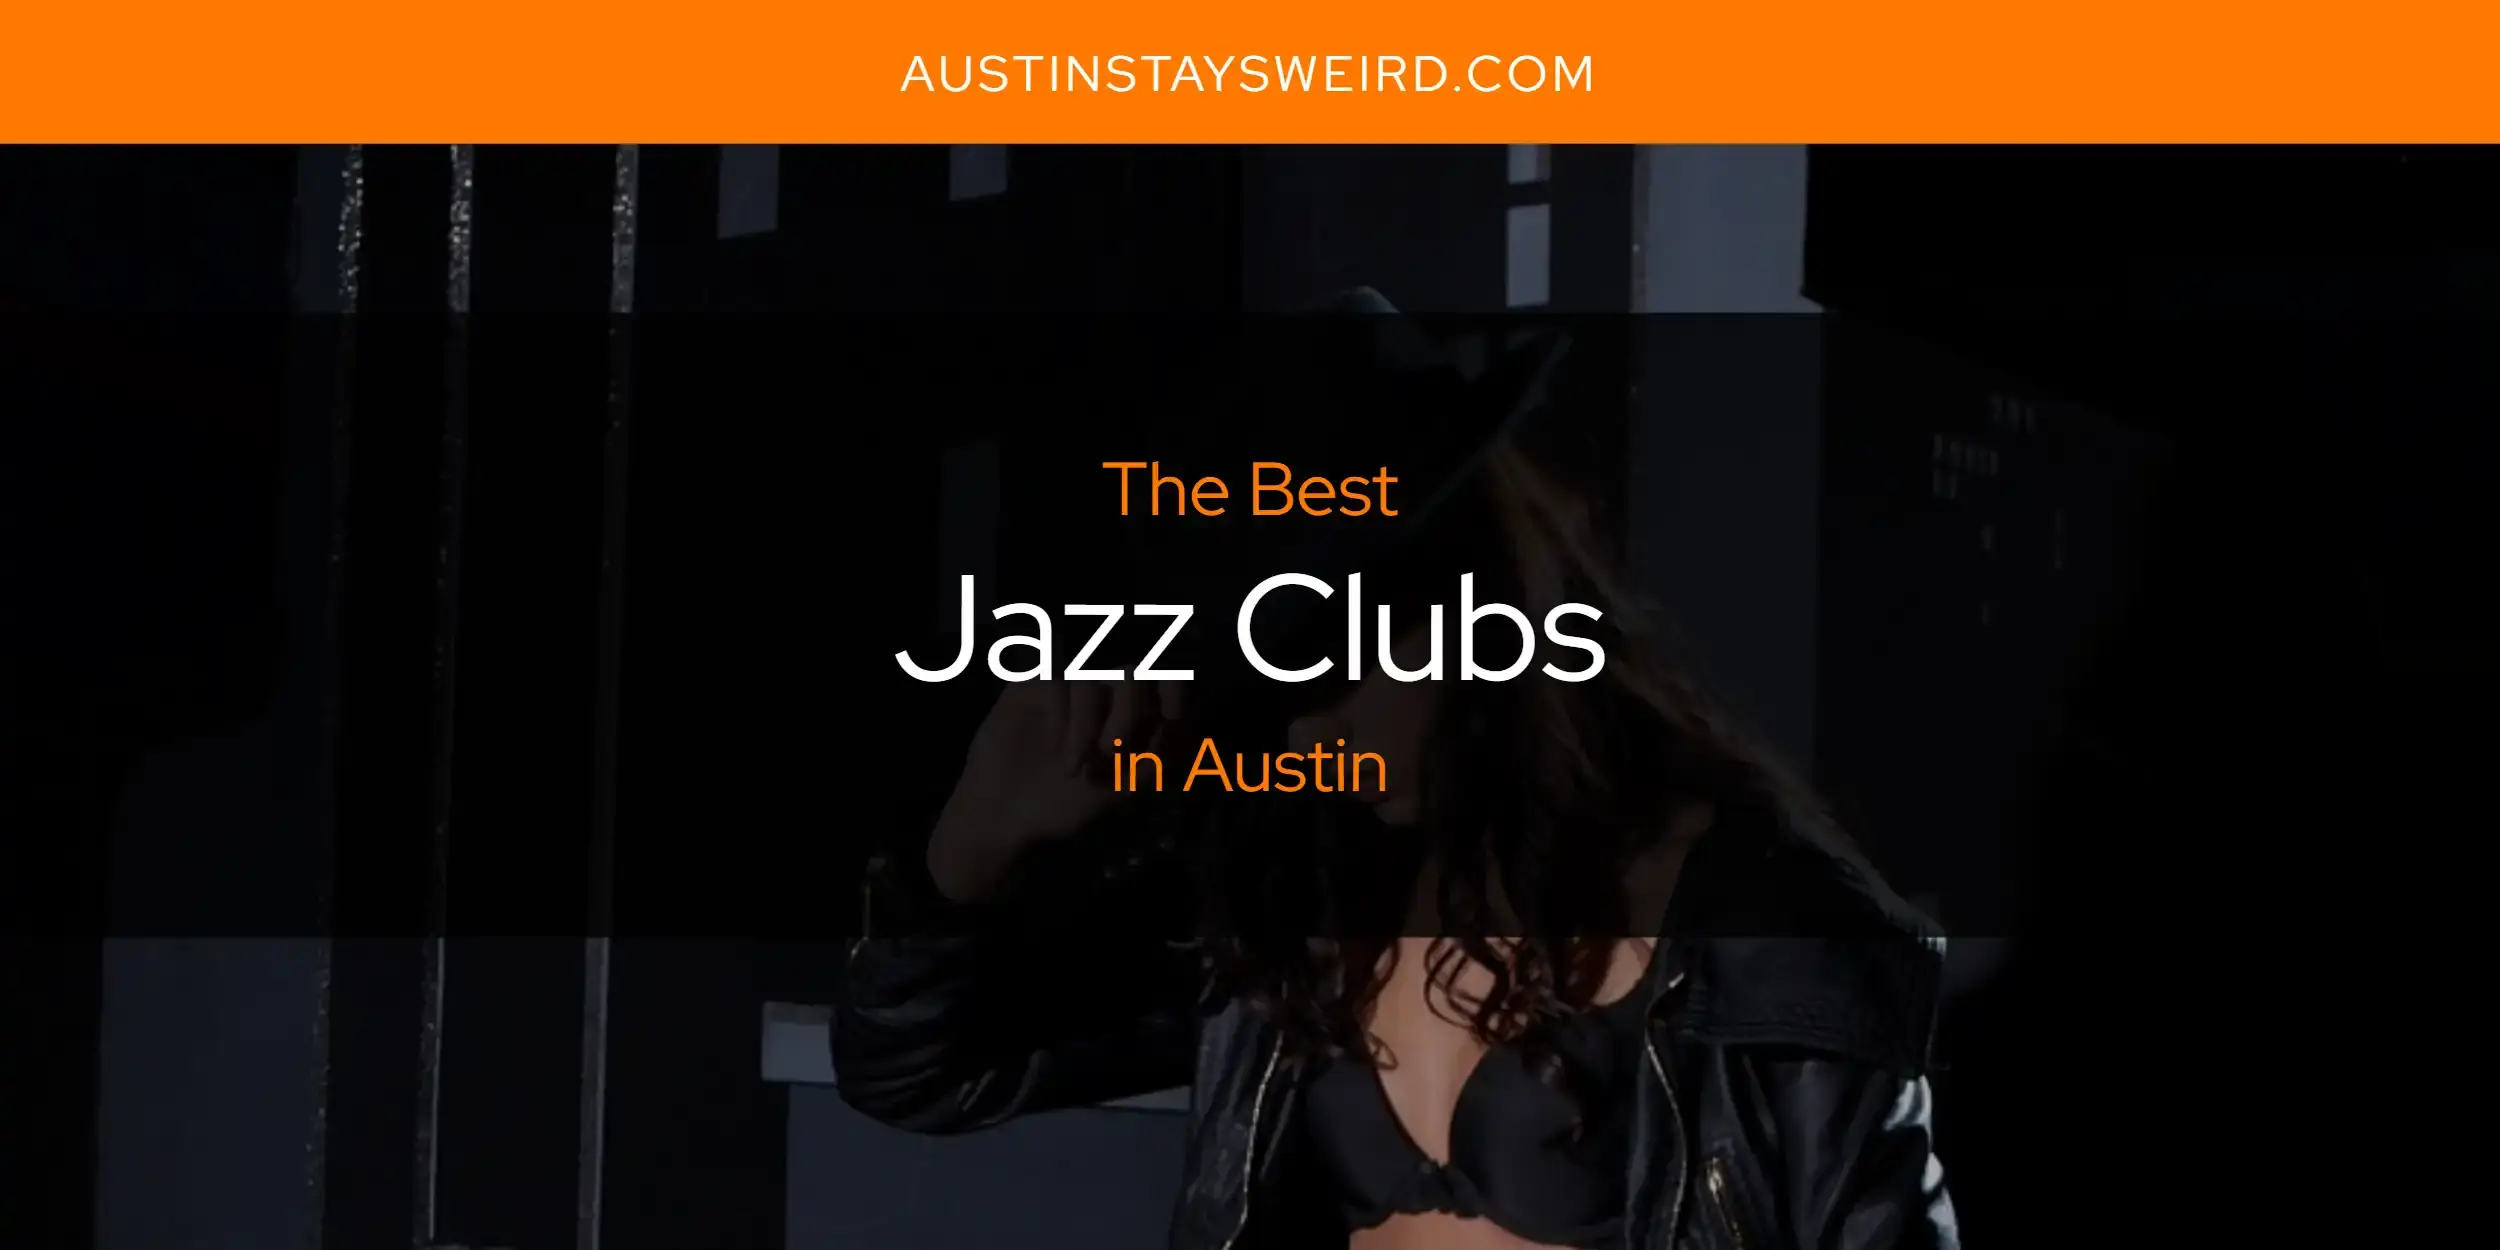 Best Jazz Clubs in Austin? Here's the Top 8